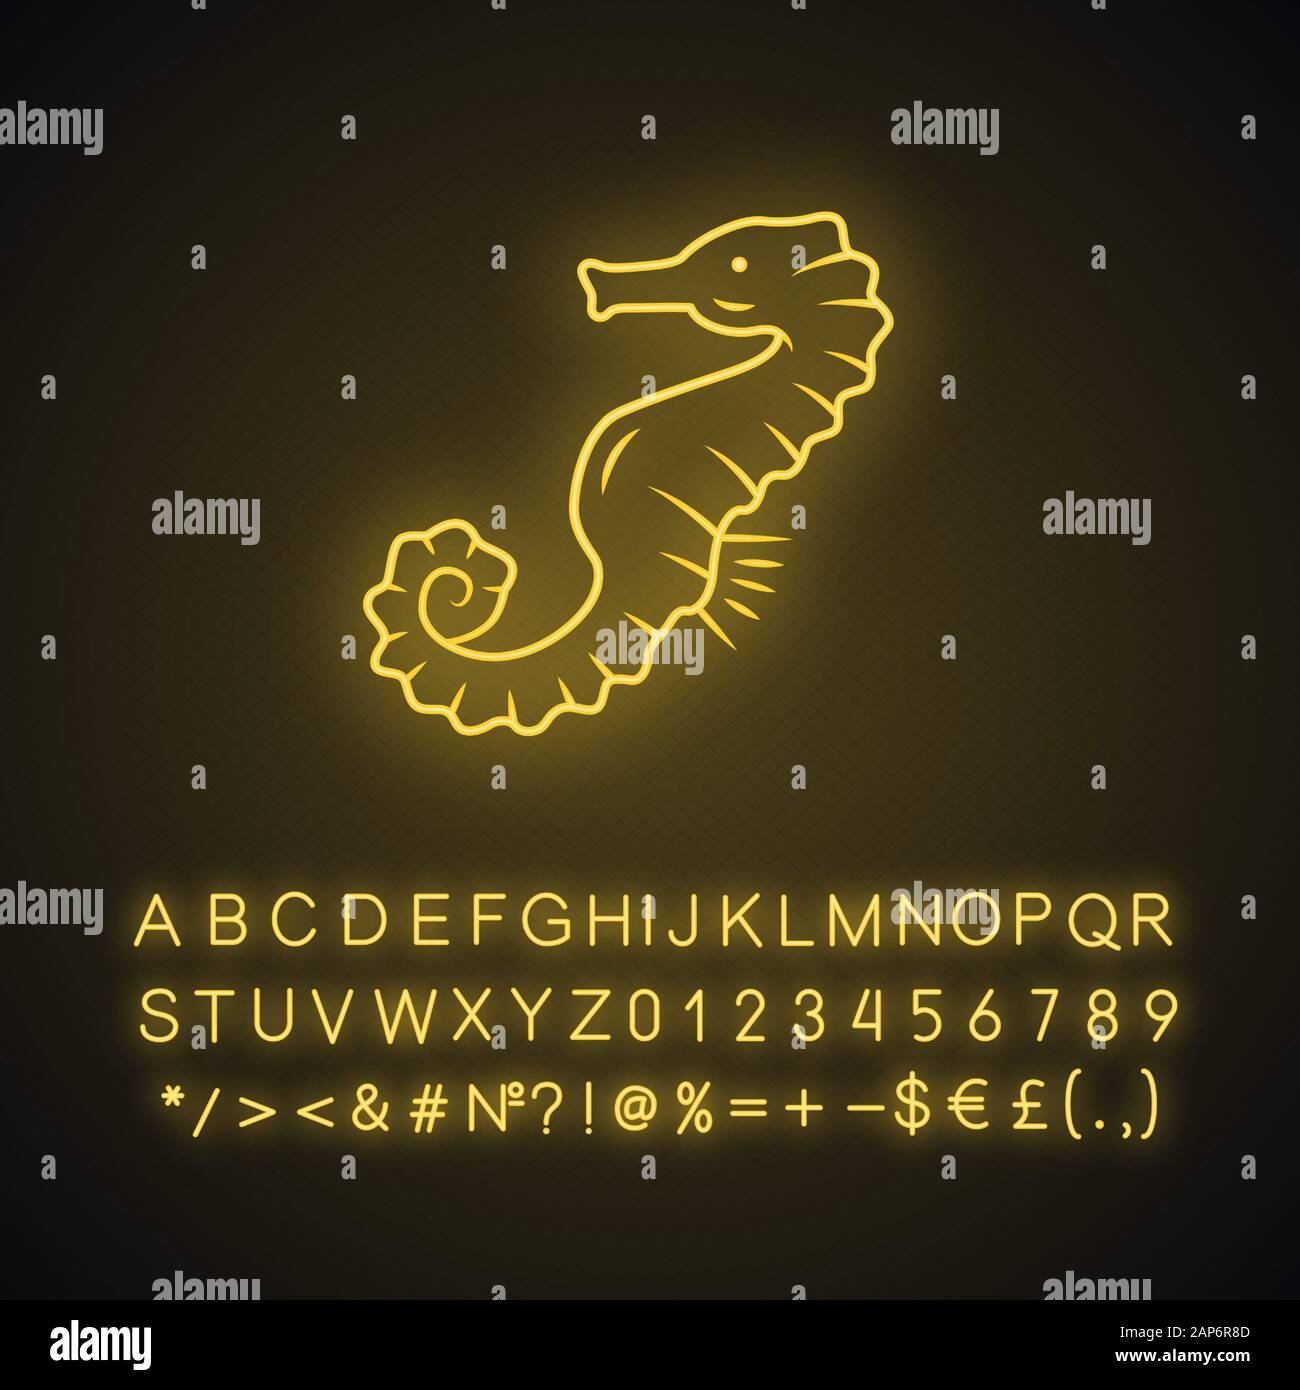 Seahorse neon light icon. Exotic fish. Aquatic creature with horse shape body. Swimming underwater organism. Marine fauna. Glowing sign with alphabet, Stock Vector